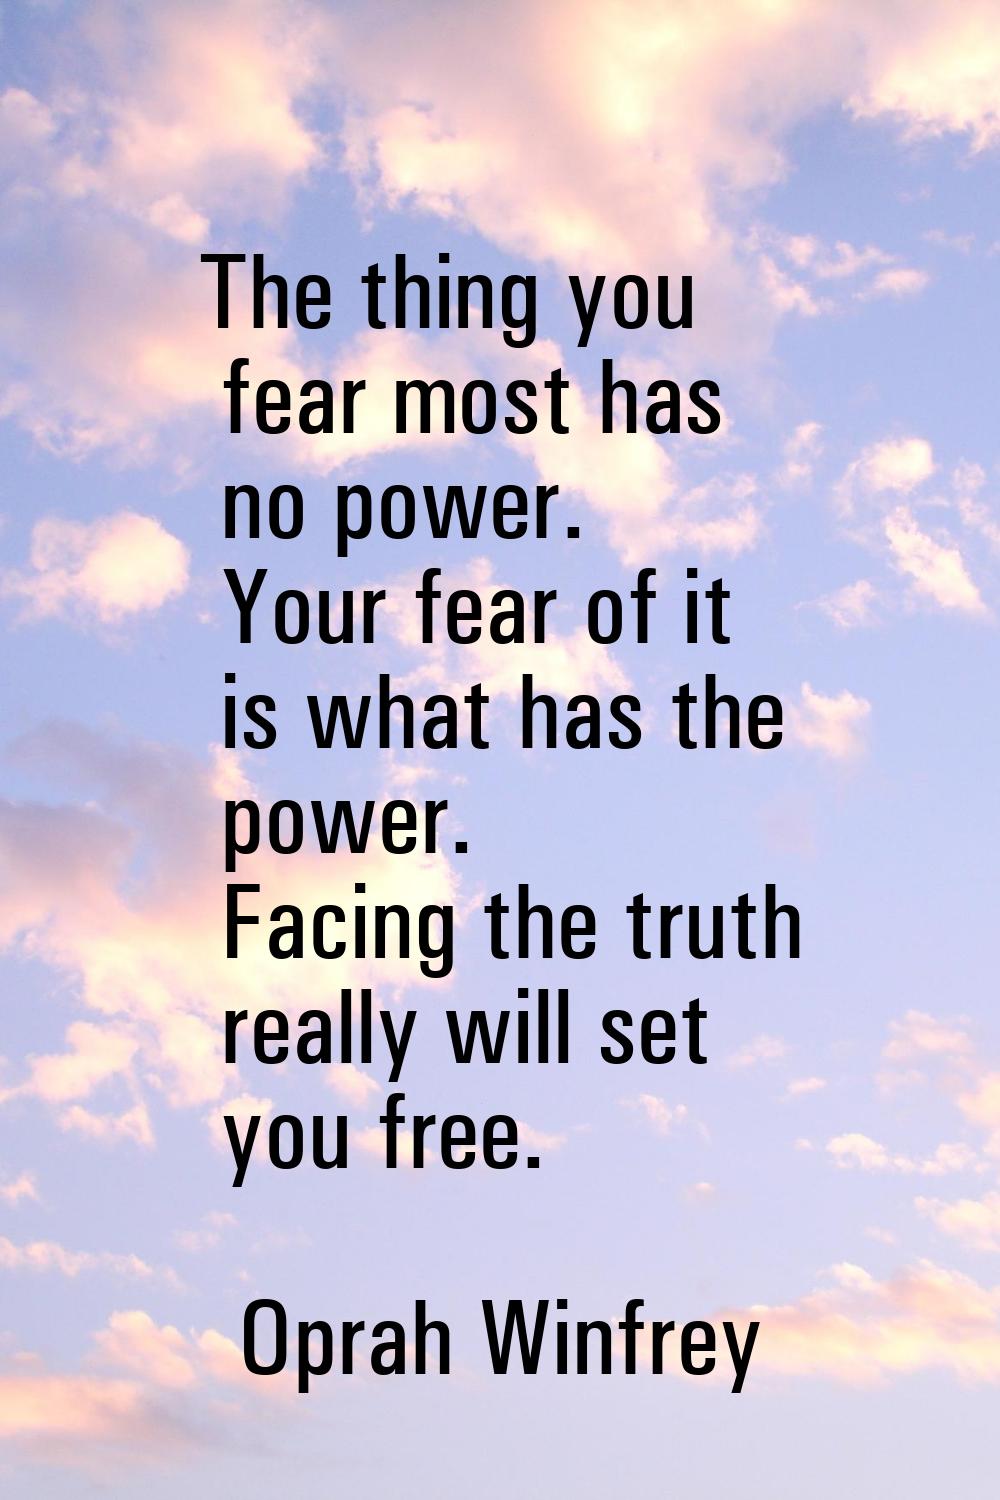 The thing you fear most has no power. Your fear of it is what has the power. Facing the truth reall